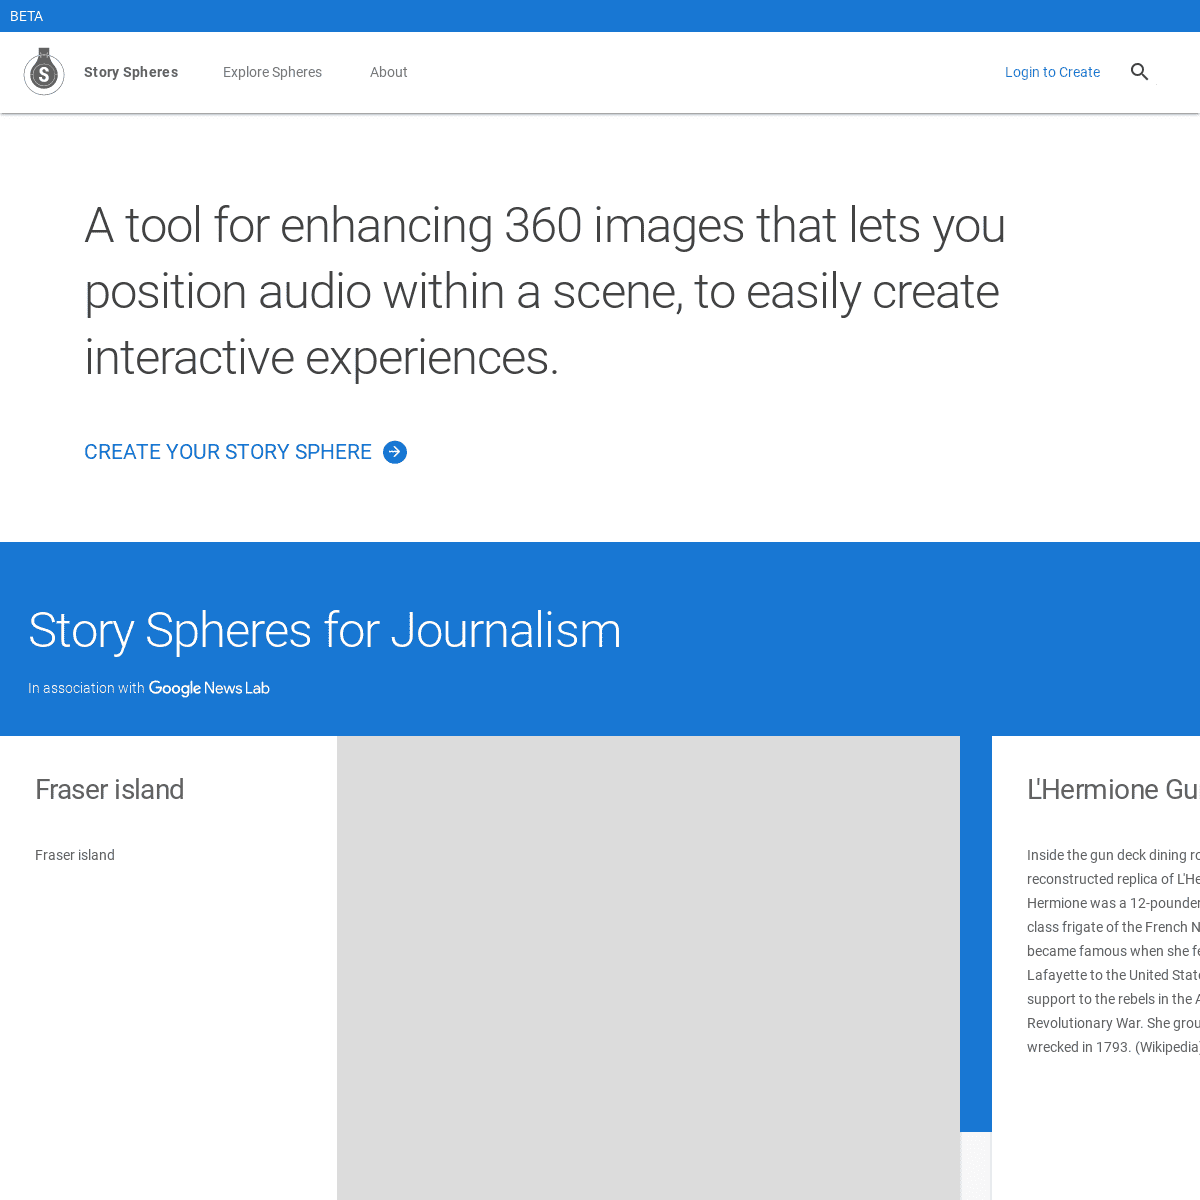 A complete backup of https://storyspheres.com